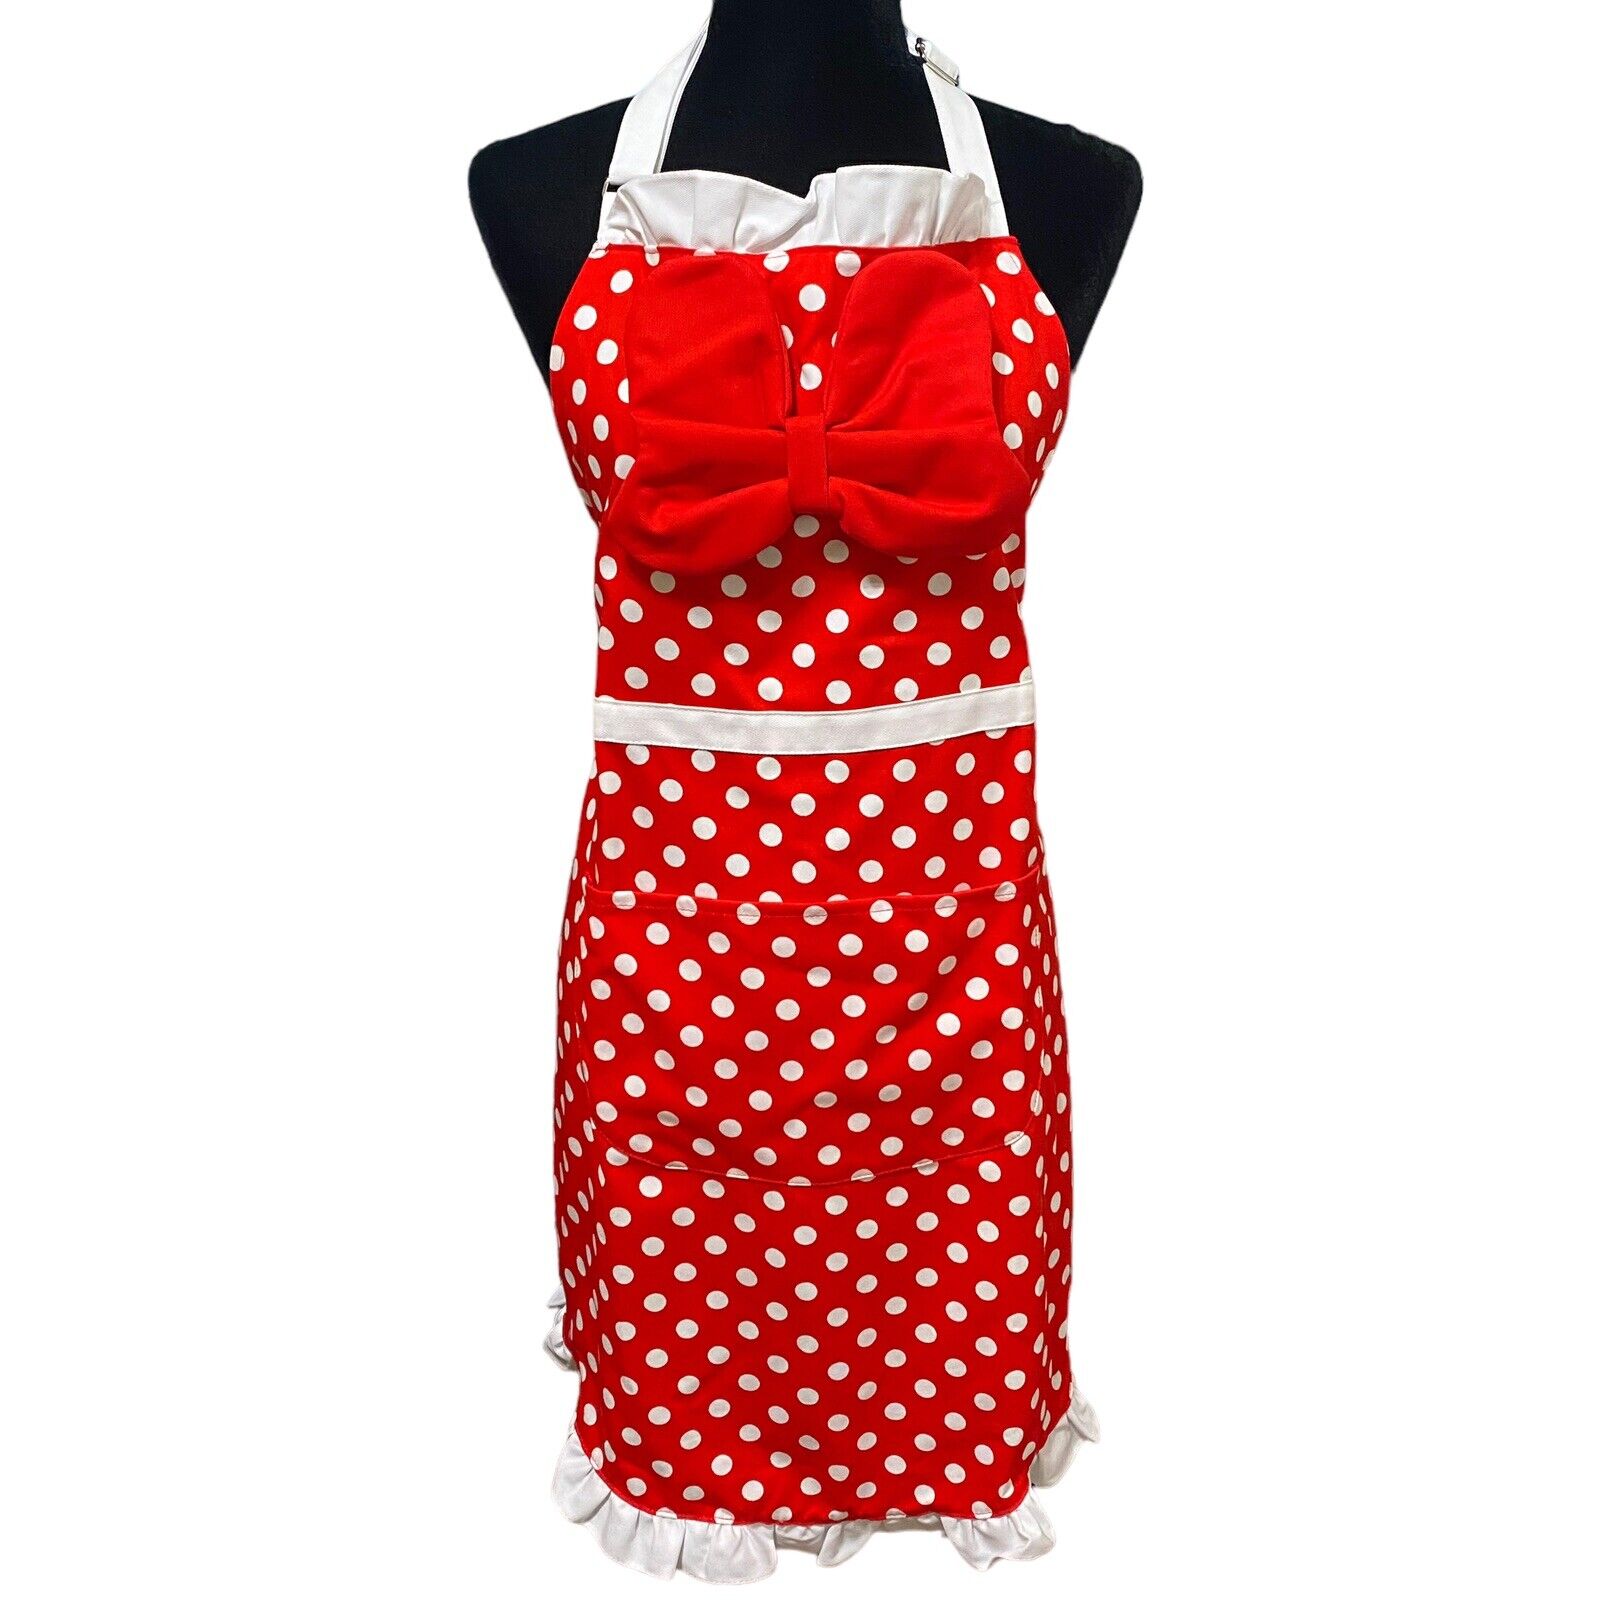 Disney Parks Minnie Mouse Apron Red Bow White Polka Dots Adult Size